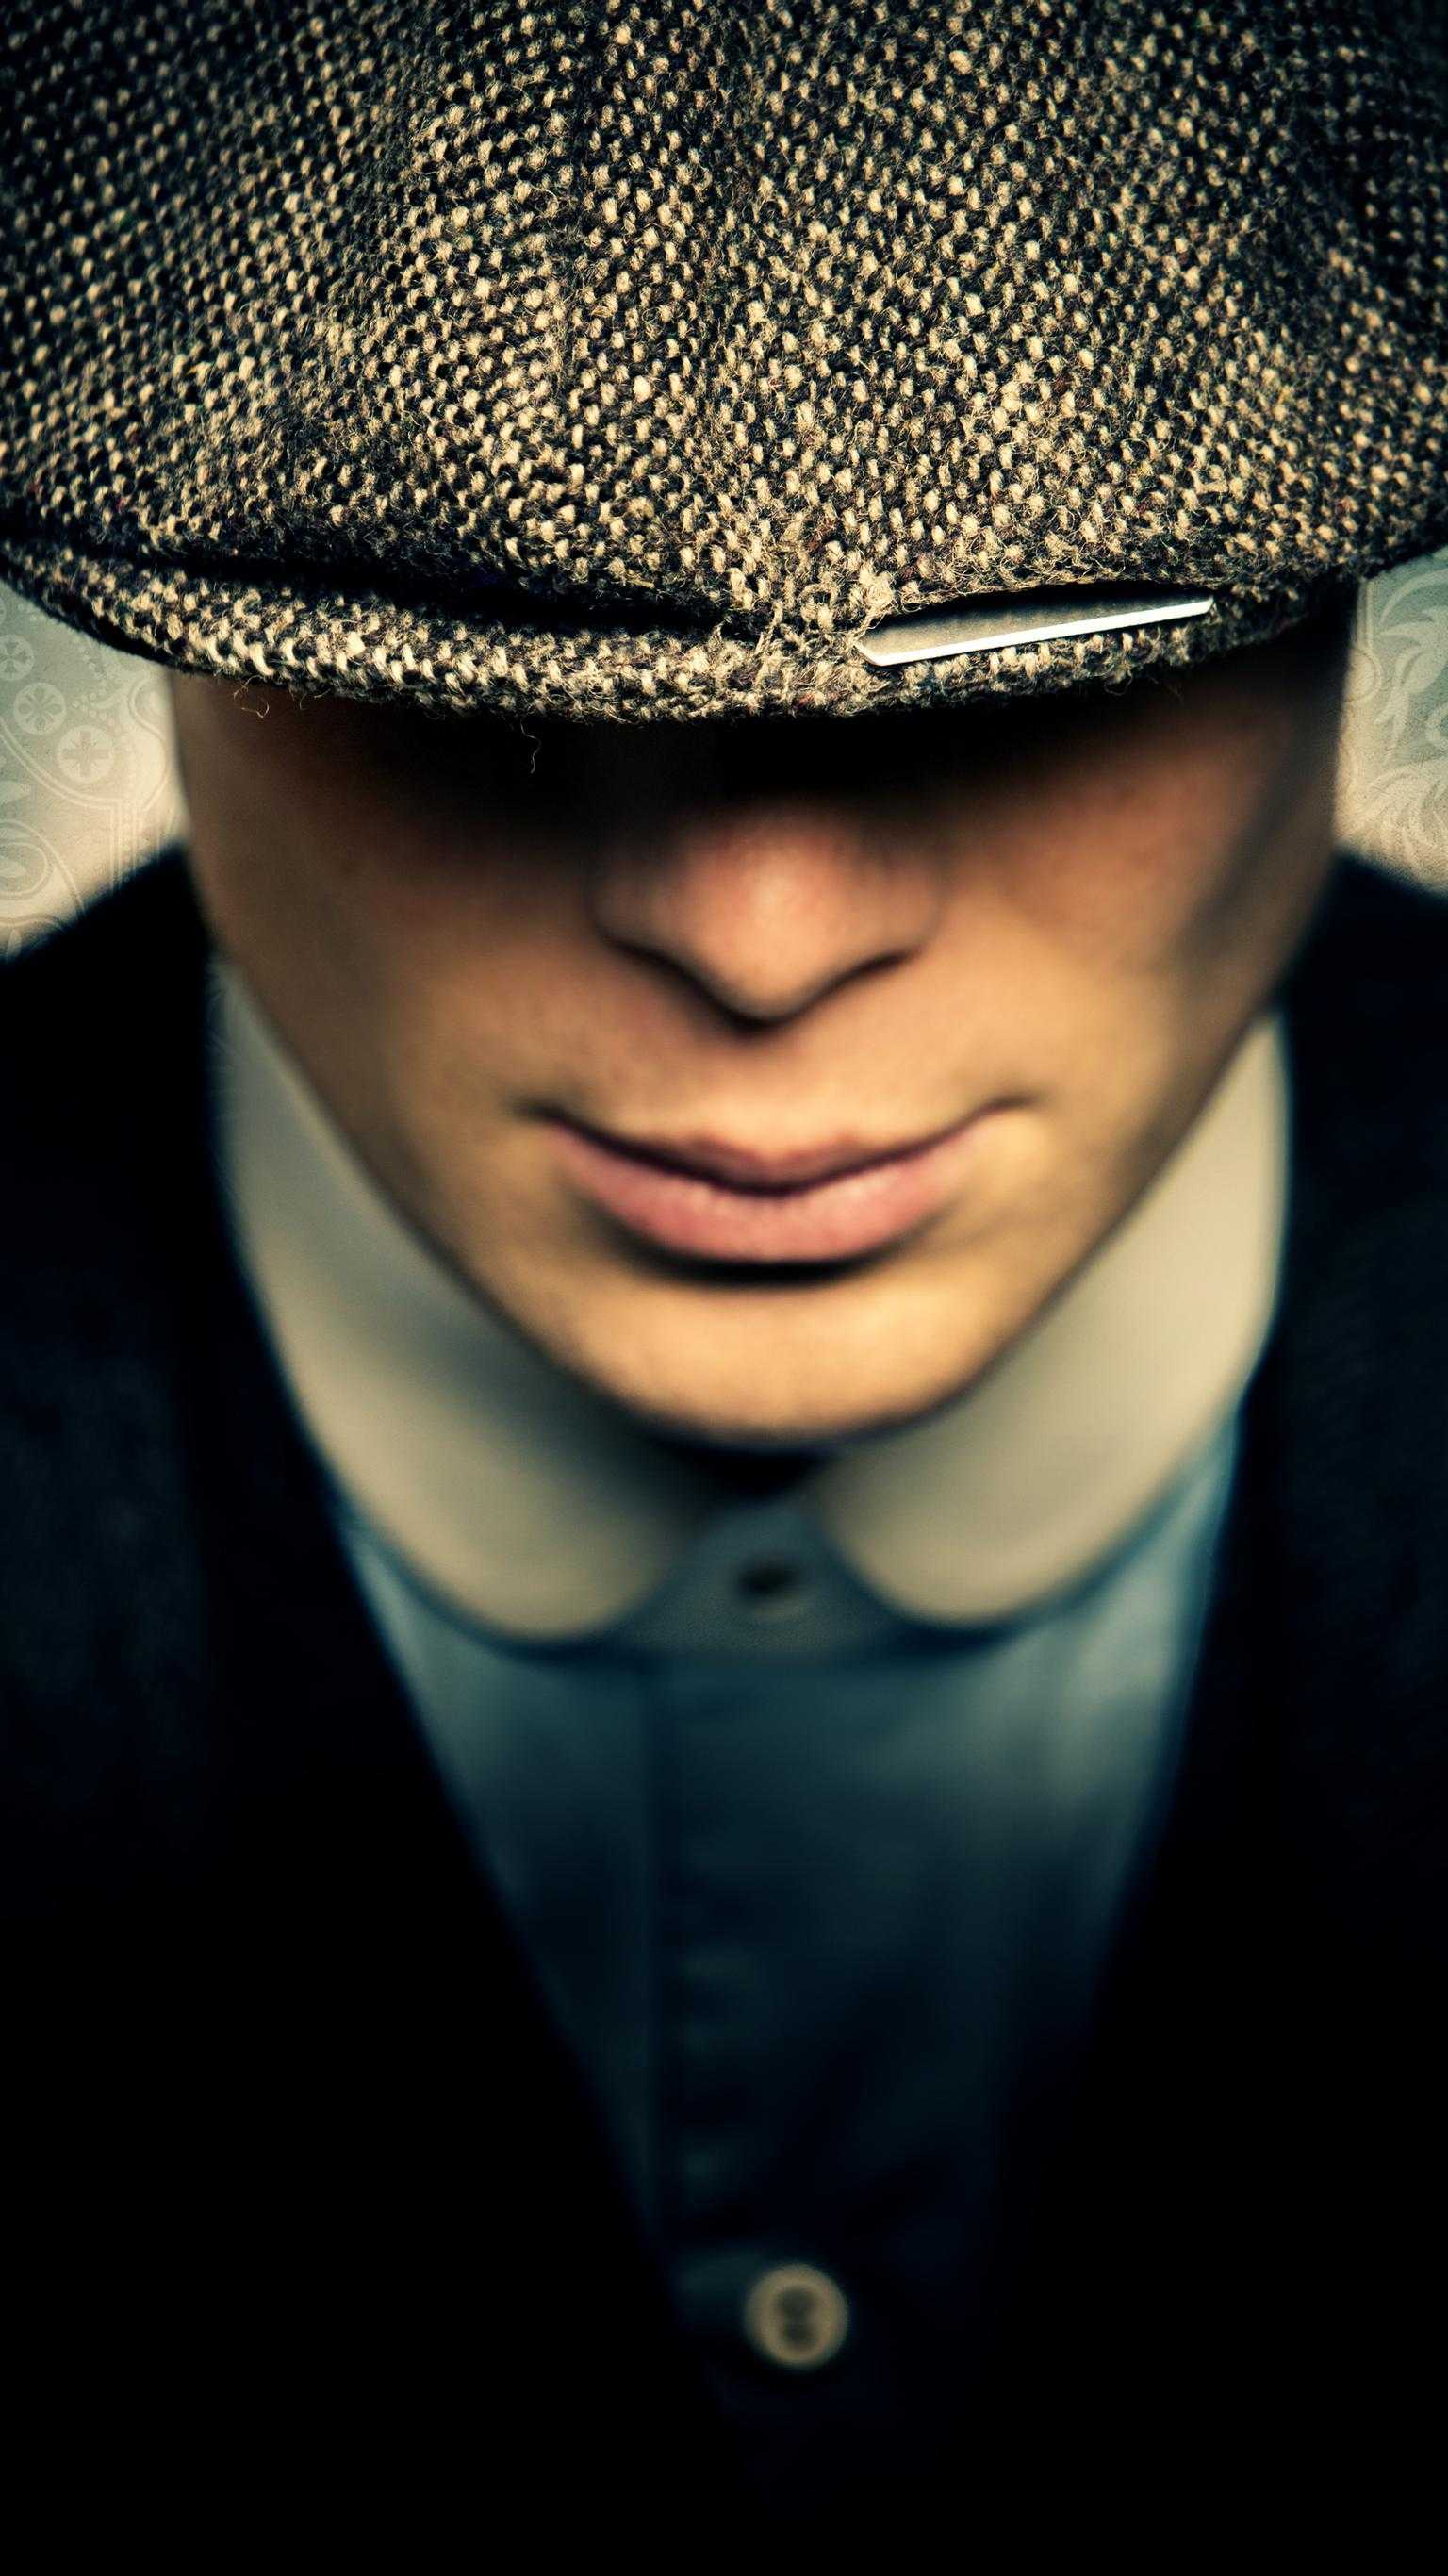 Peaky Blinders Quotes Wallpapers